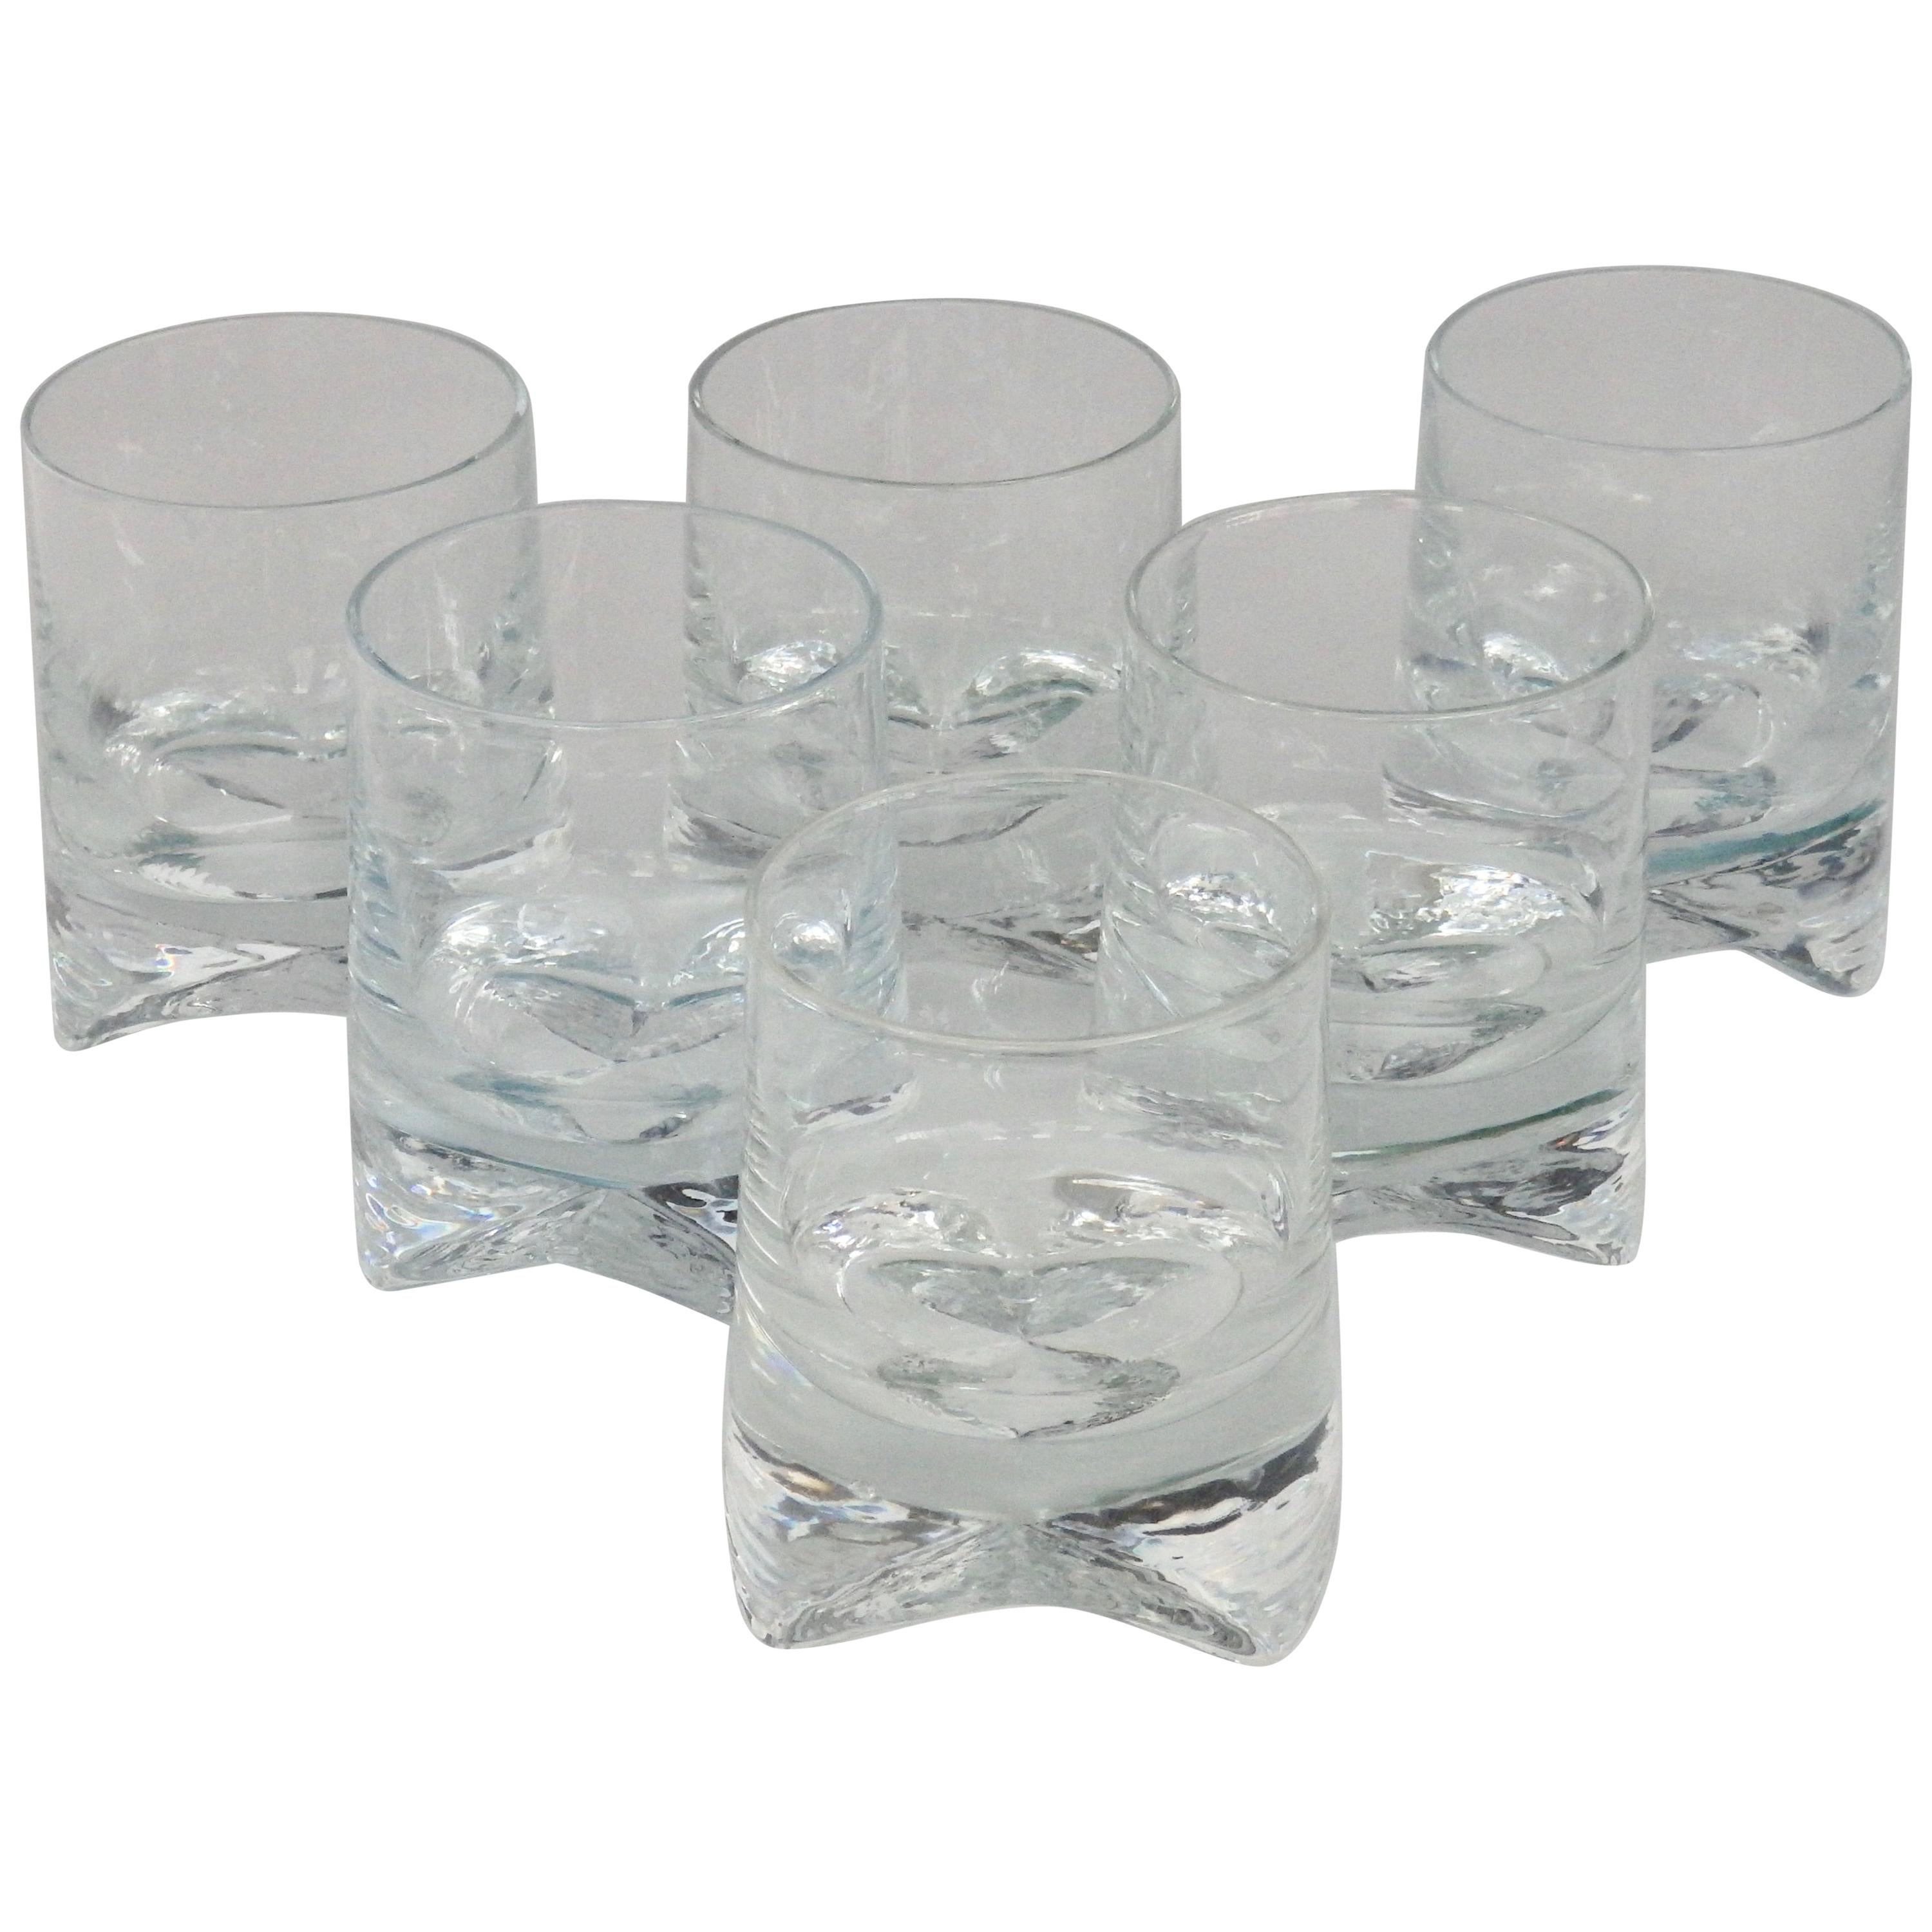 Six Clear Whiskey Bourbon Scotch or Rocks Glasses For Sale